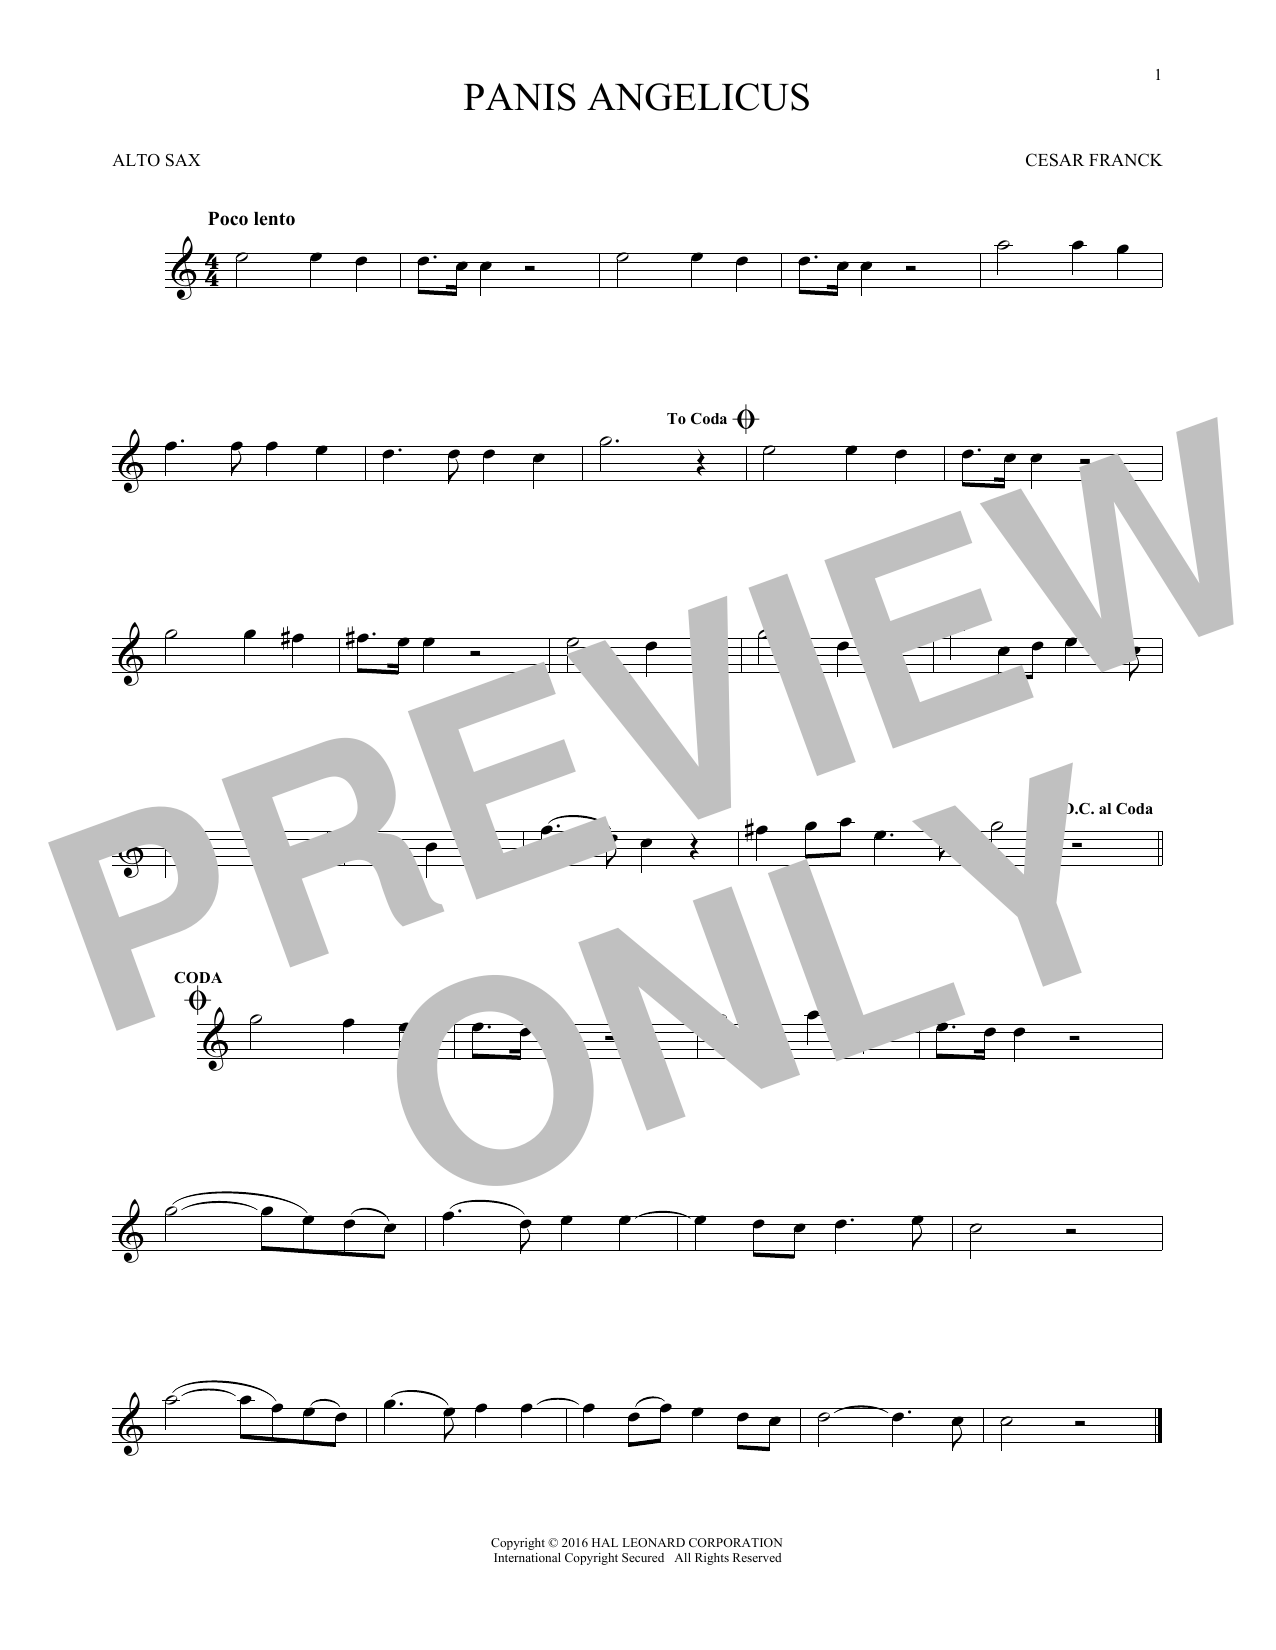 César Franck Panis Angelicus (O Lord Most Holy) sheet music notes and chords. Download Printable PDF.